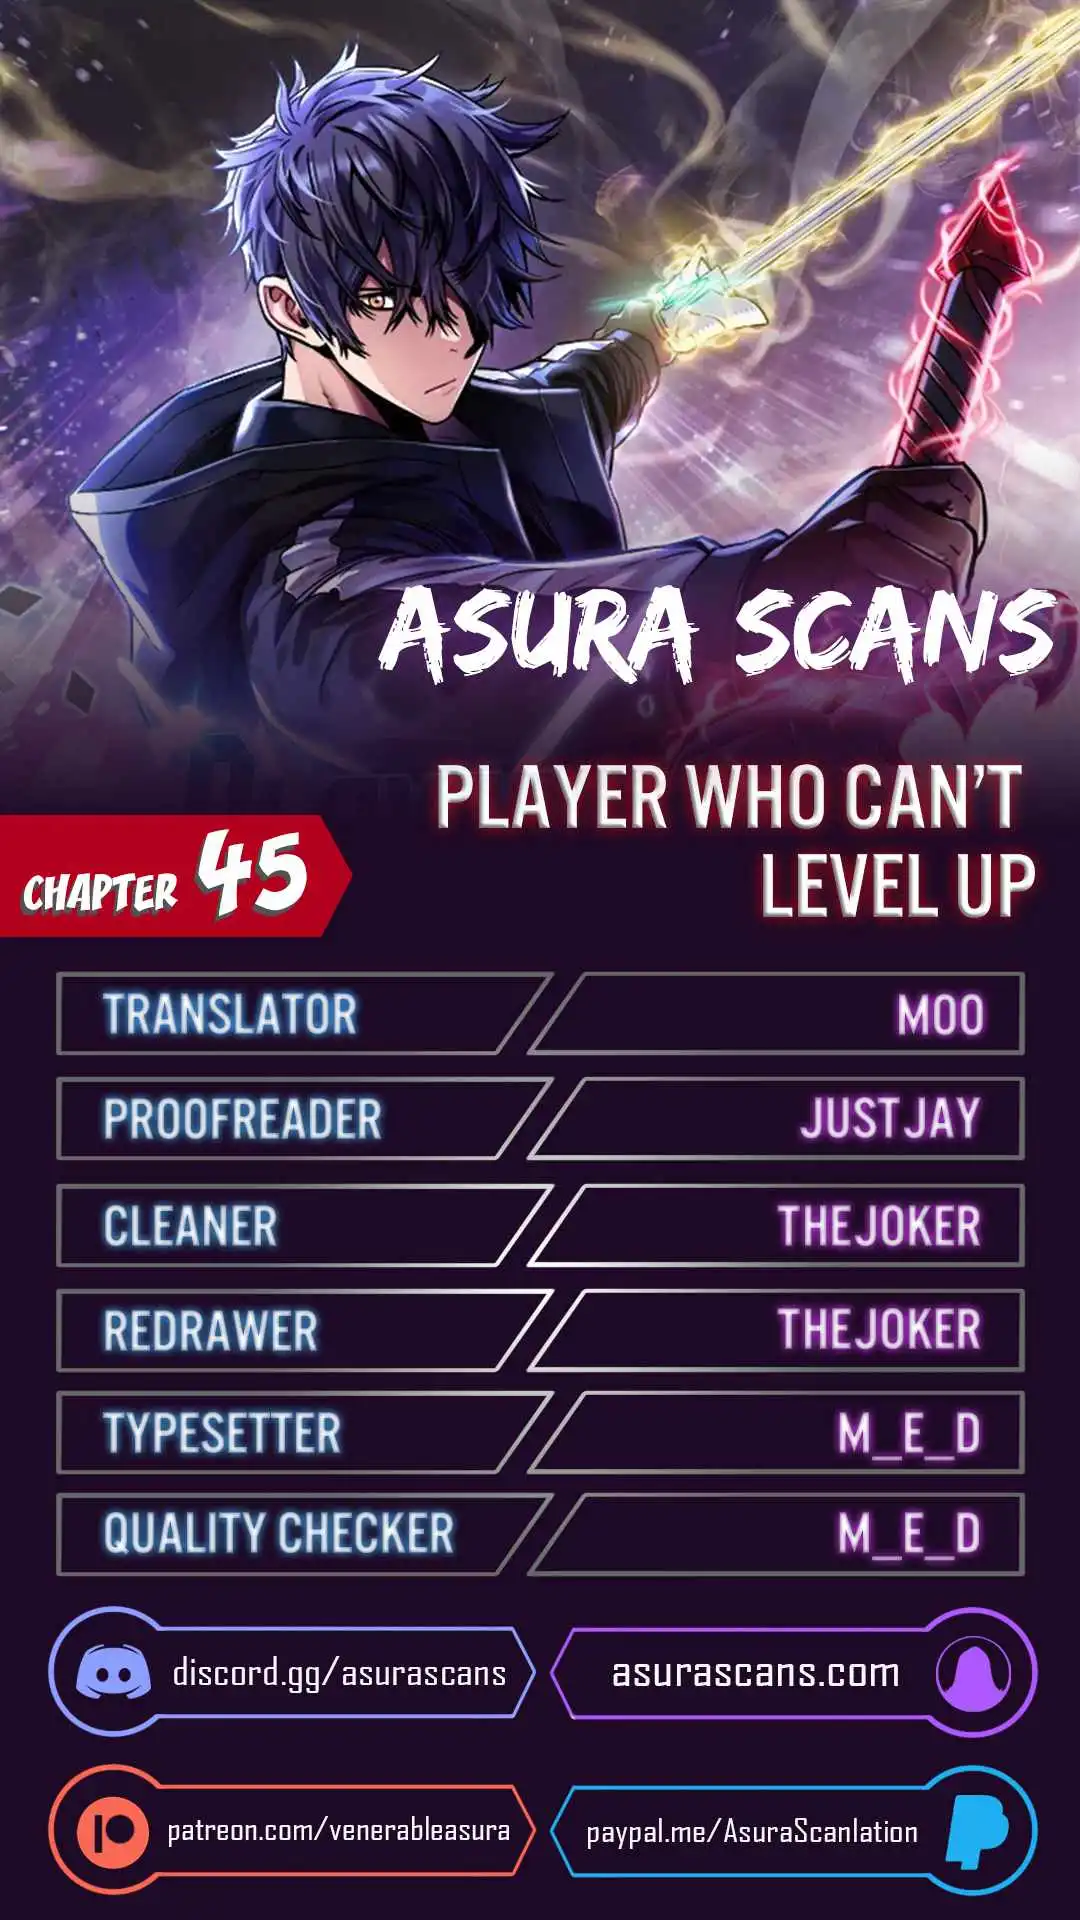  The Player That Can't Level Up Chapter 45